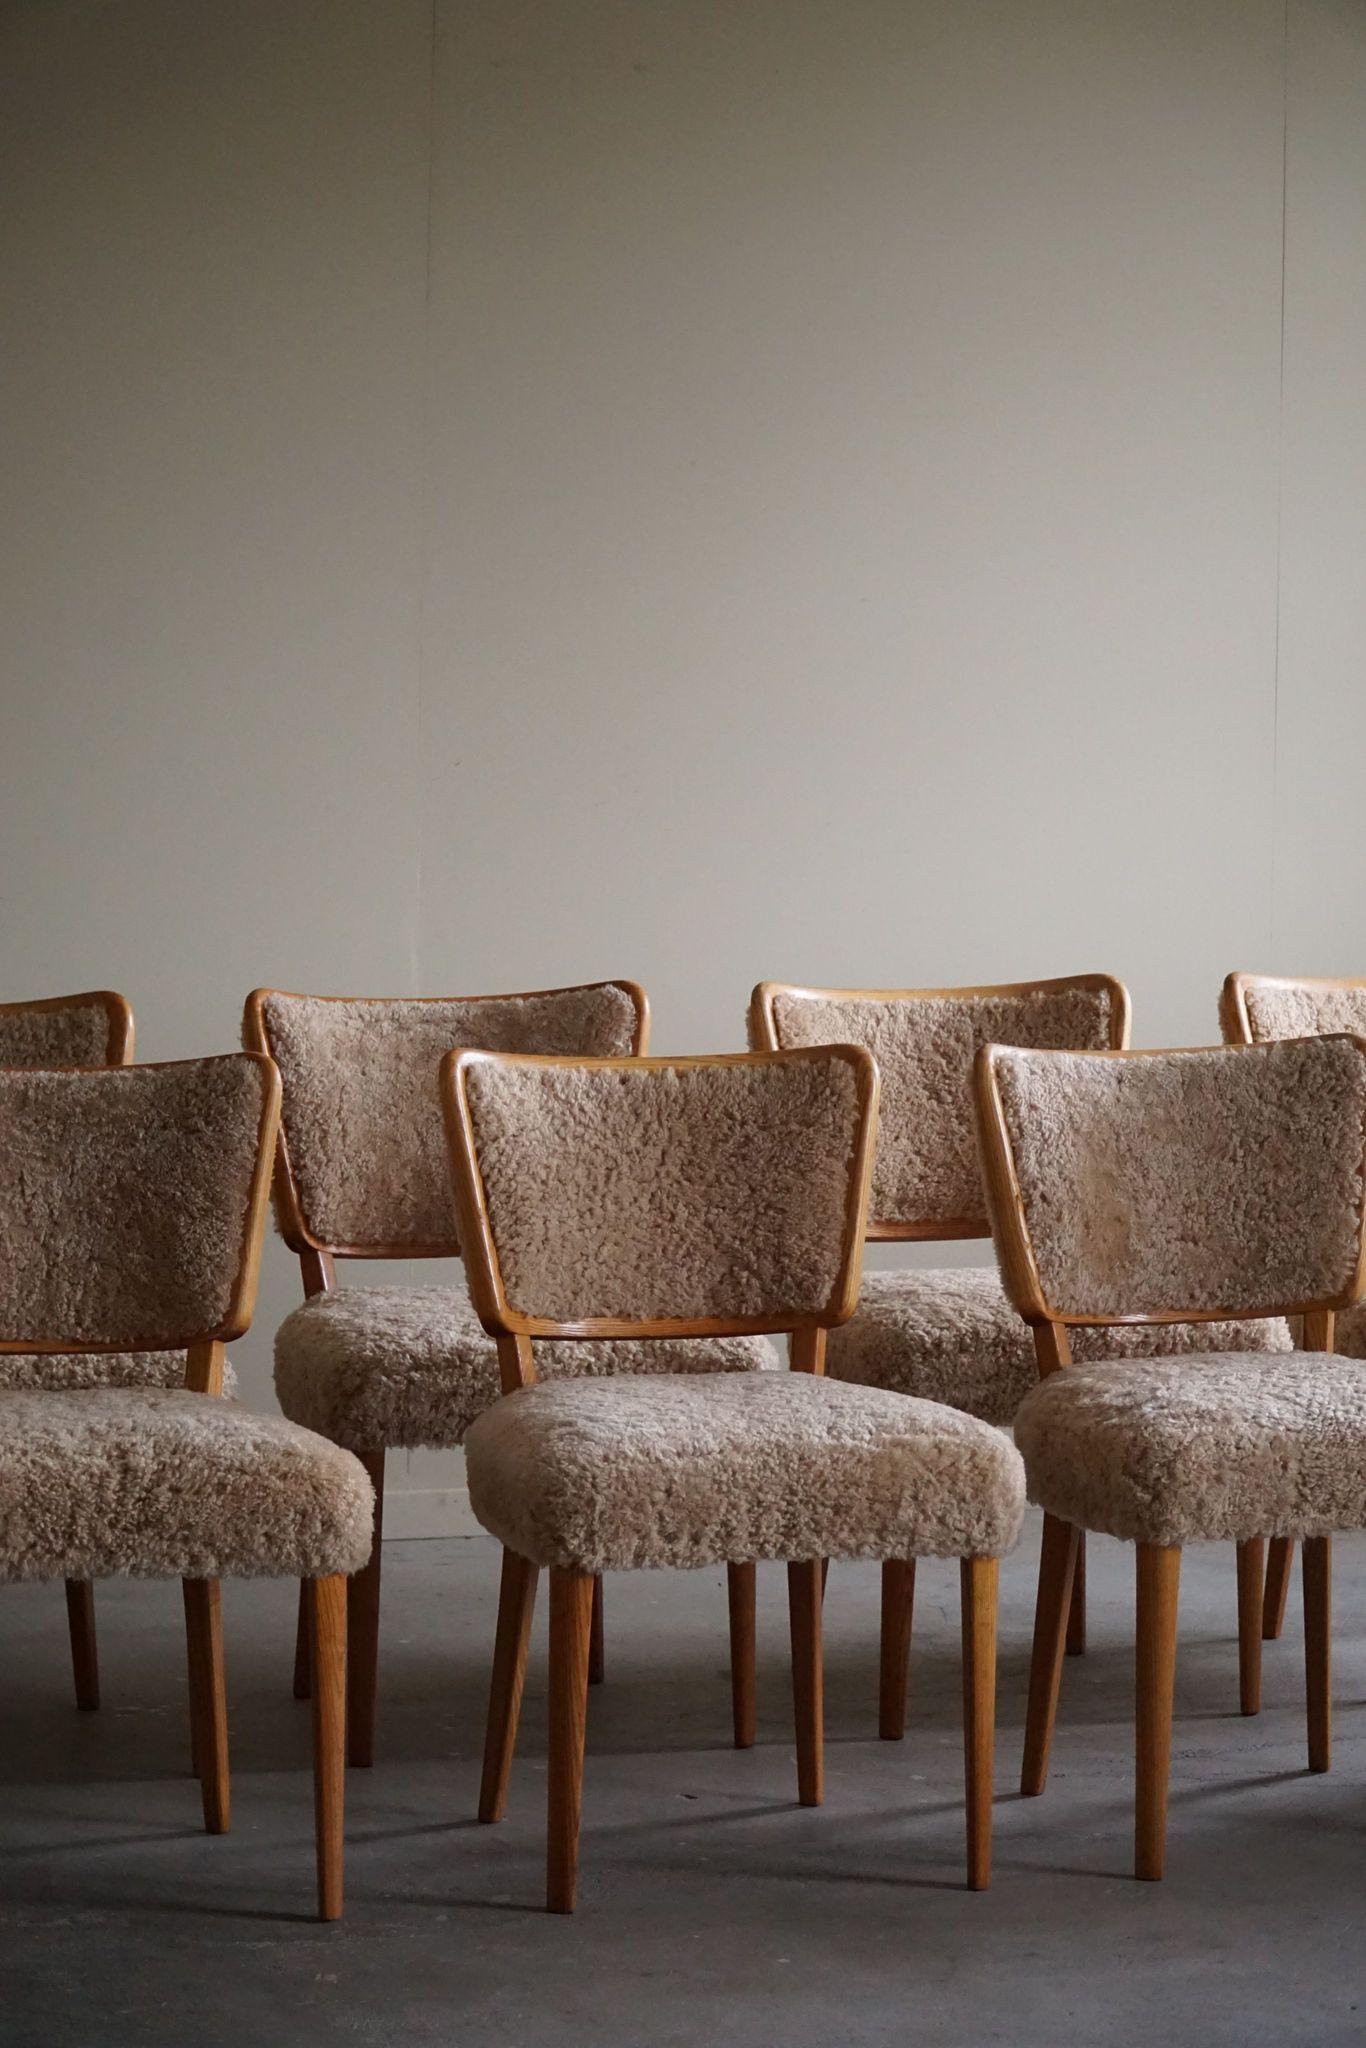 Introducing an exquisite set of eight dining chairs that embody the timeless elegance of mid-century Swedish modern design. Crafted by furniture company Innternung AB Malmö Kåpe in the 1950s, labeled underneath. 

Each chair features a sleek frame